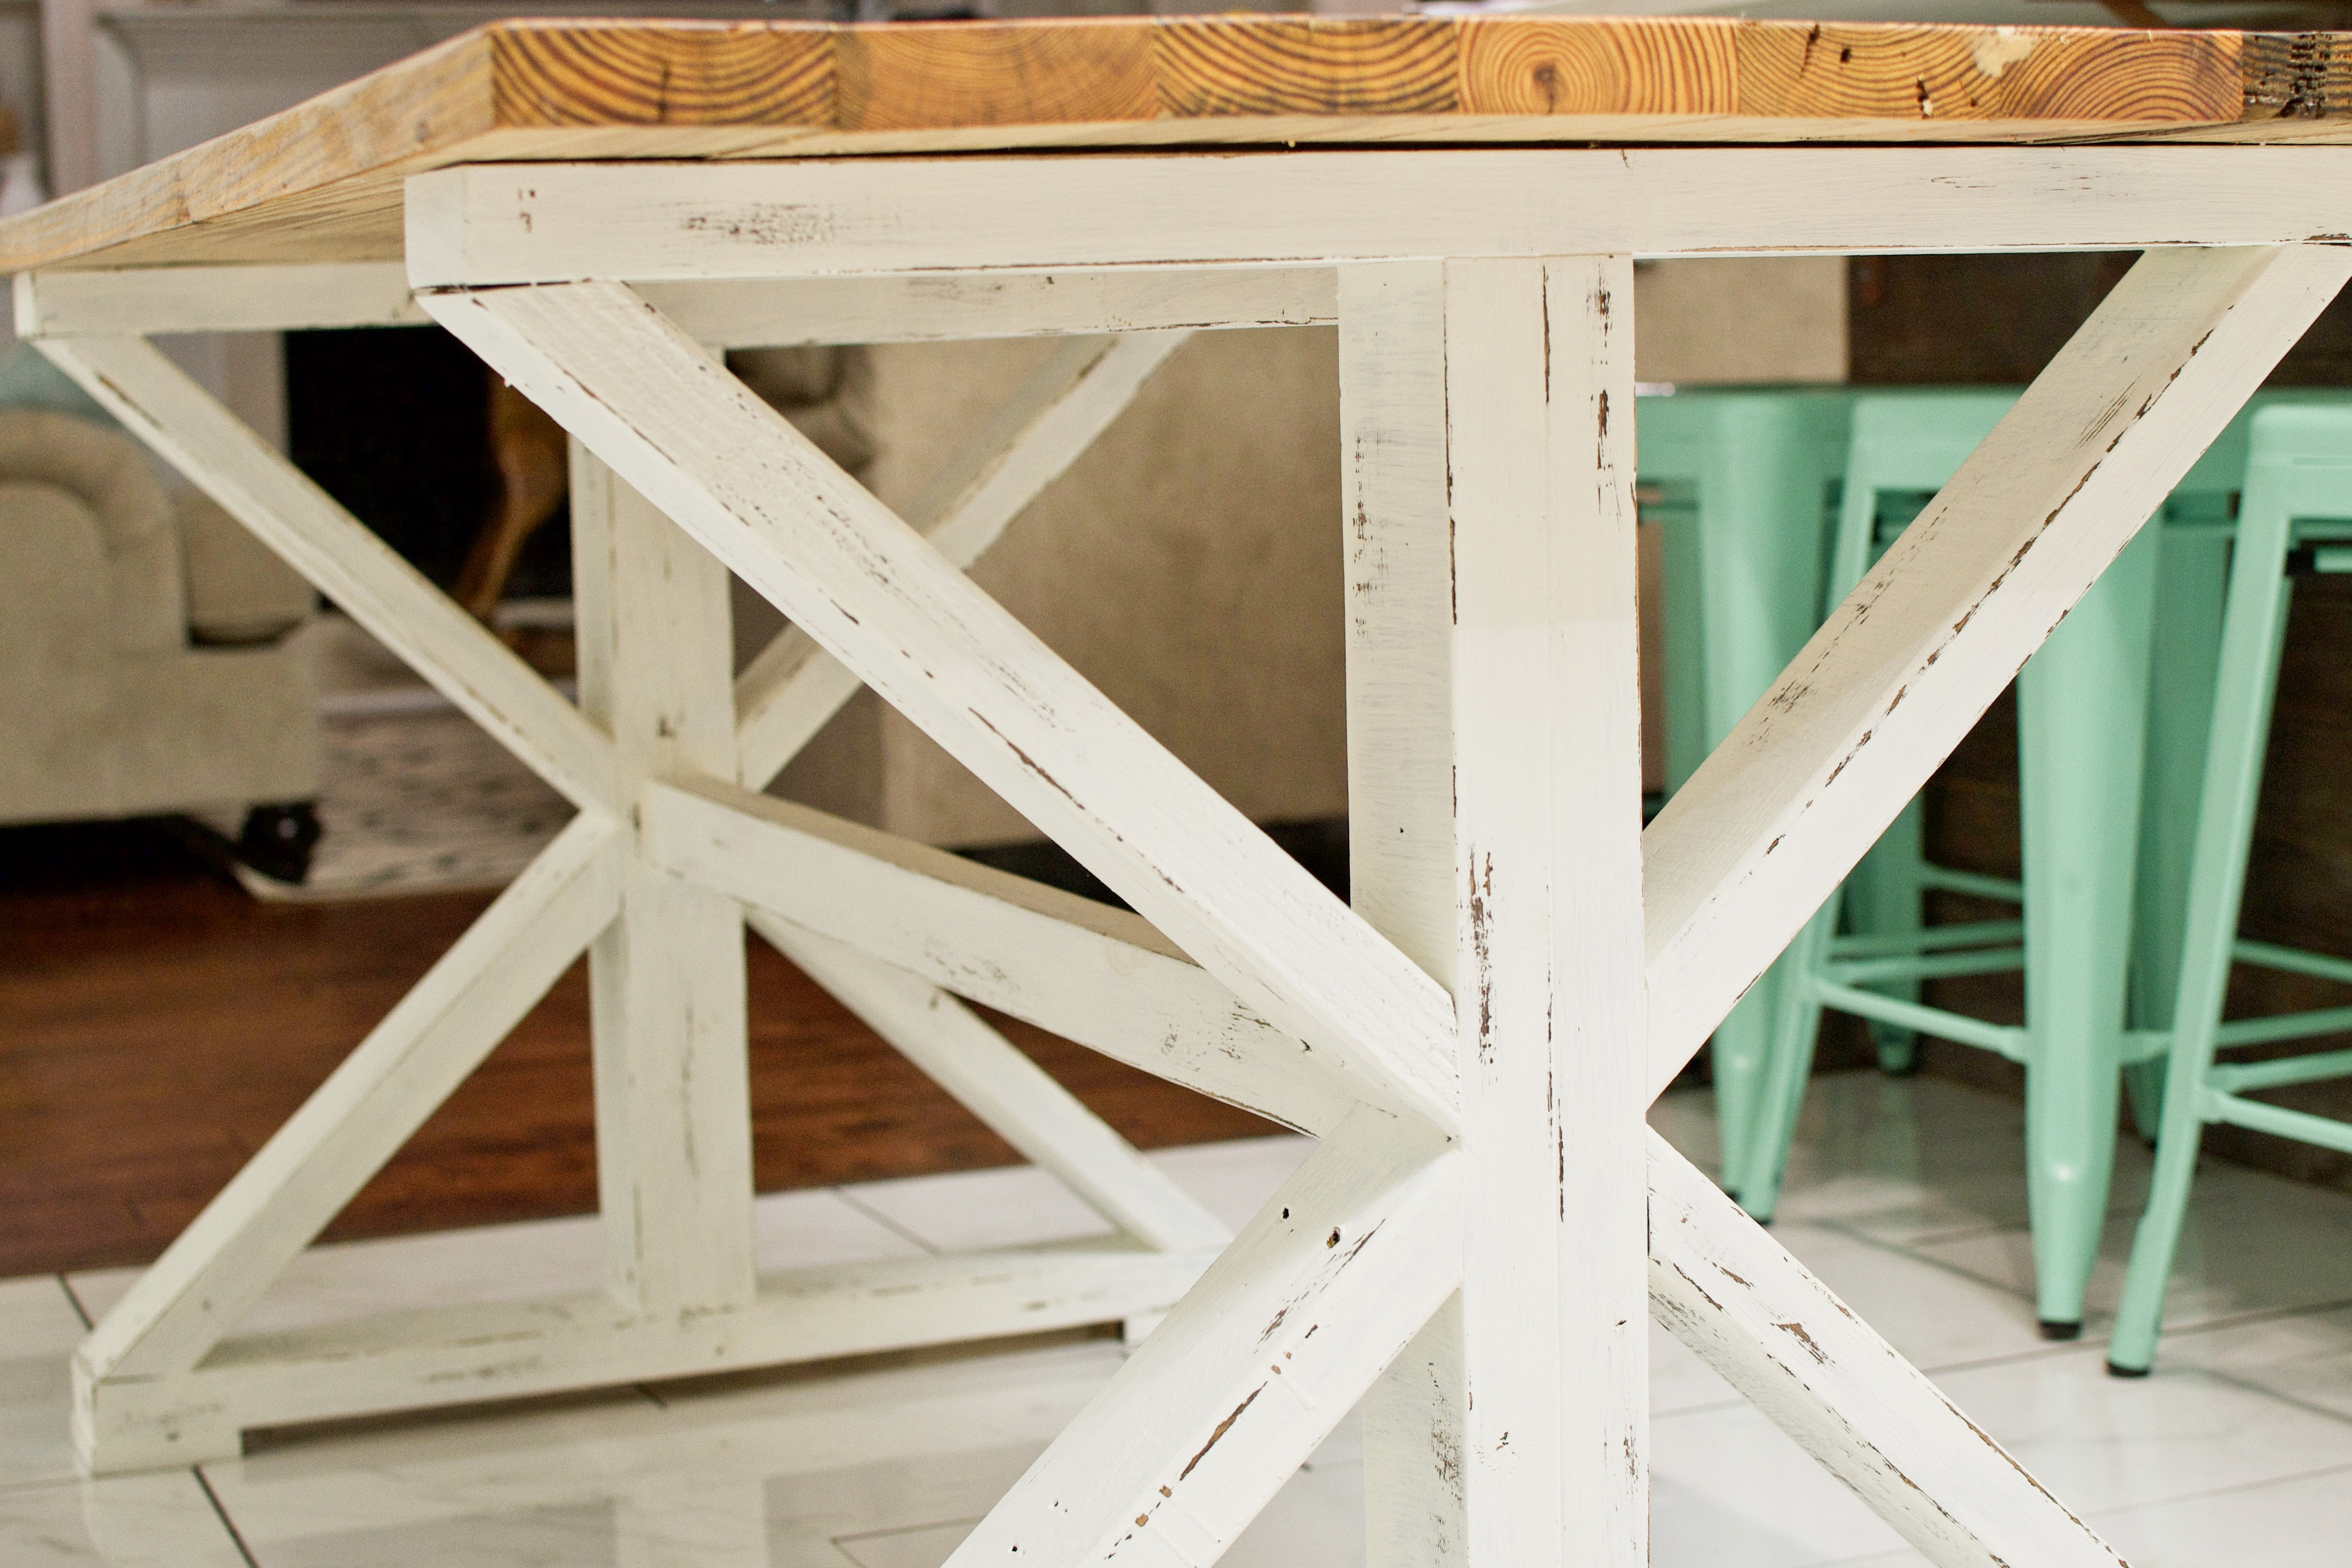 How to Finish Your Reclaimed Table with Stain, Paint, Distressing